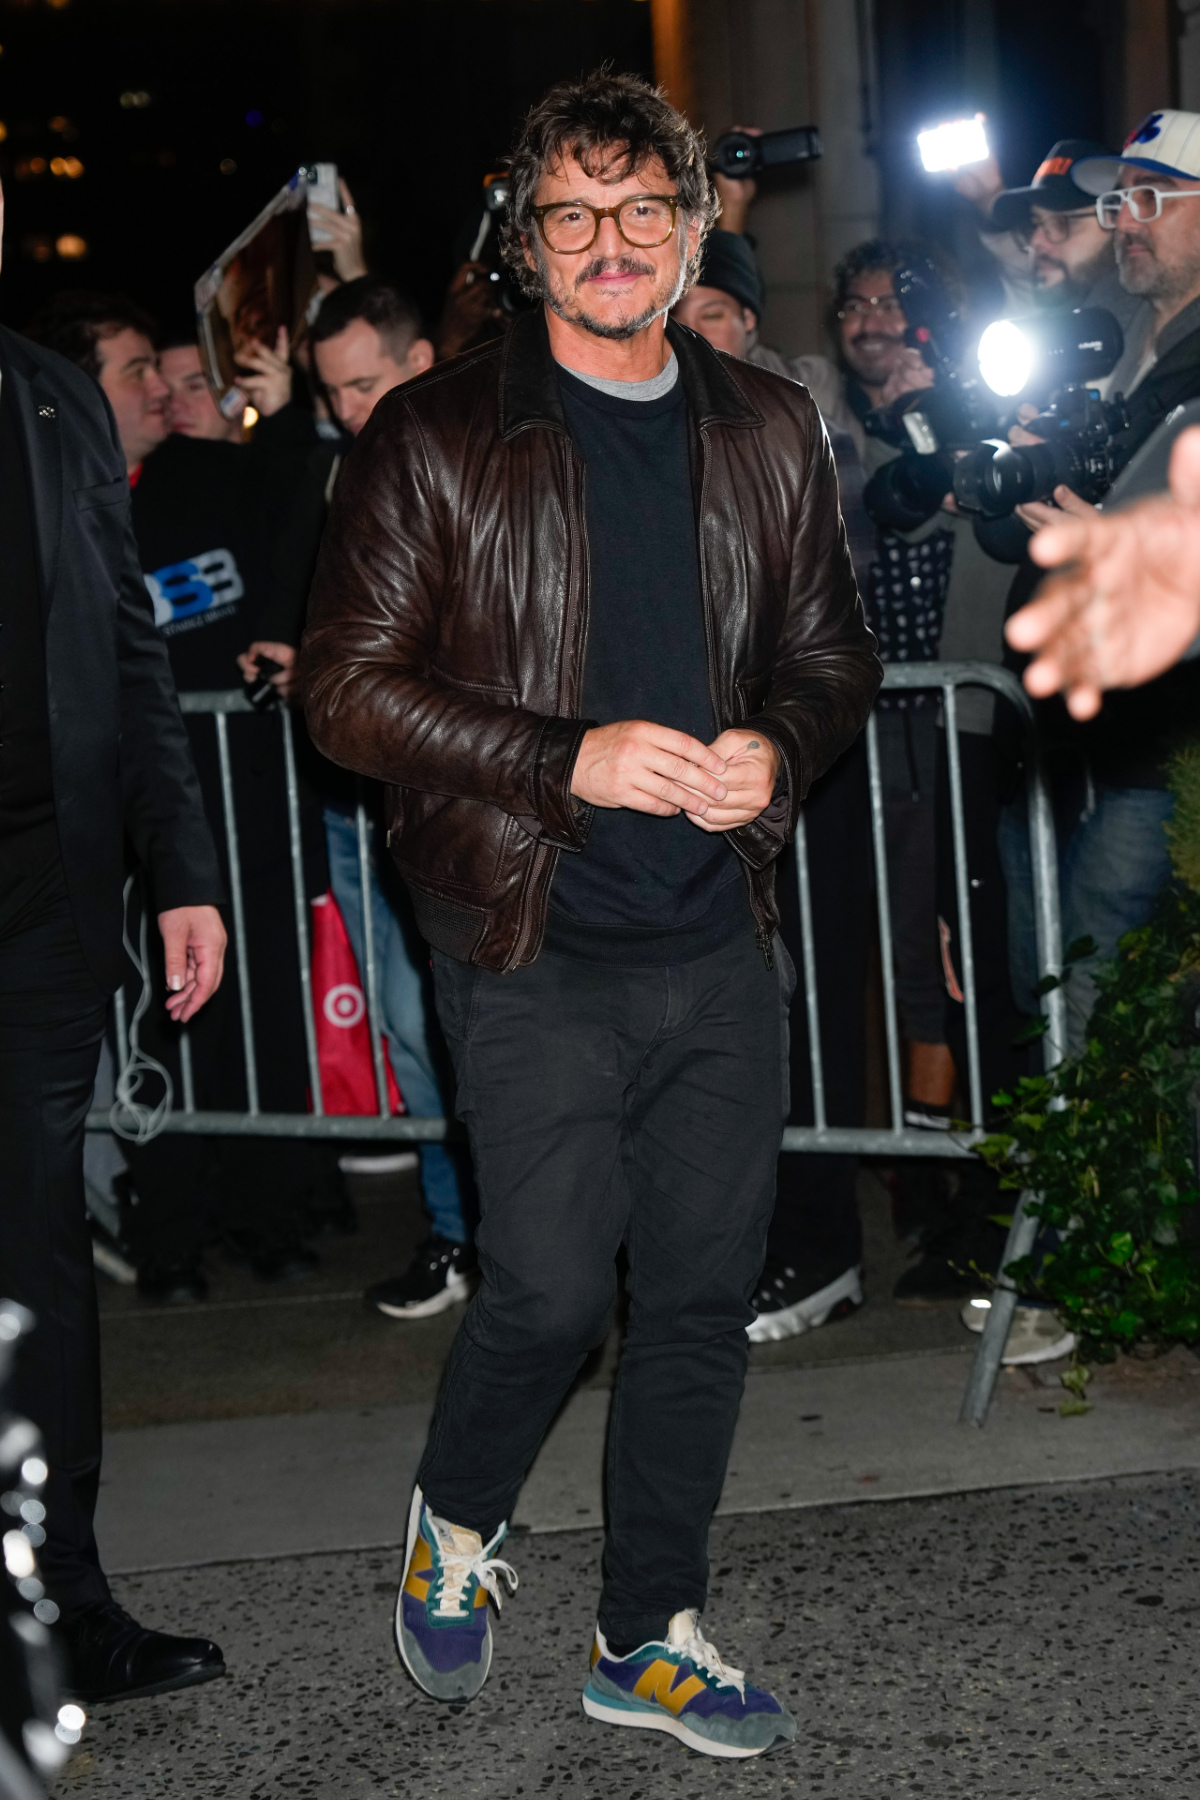 Pedro Pascal is making a case for beat up sneakers.